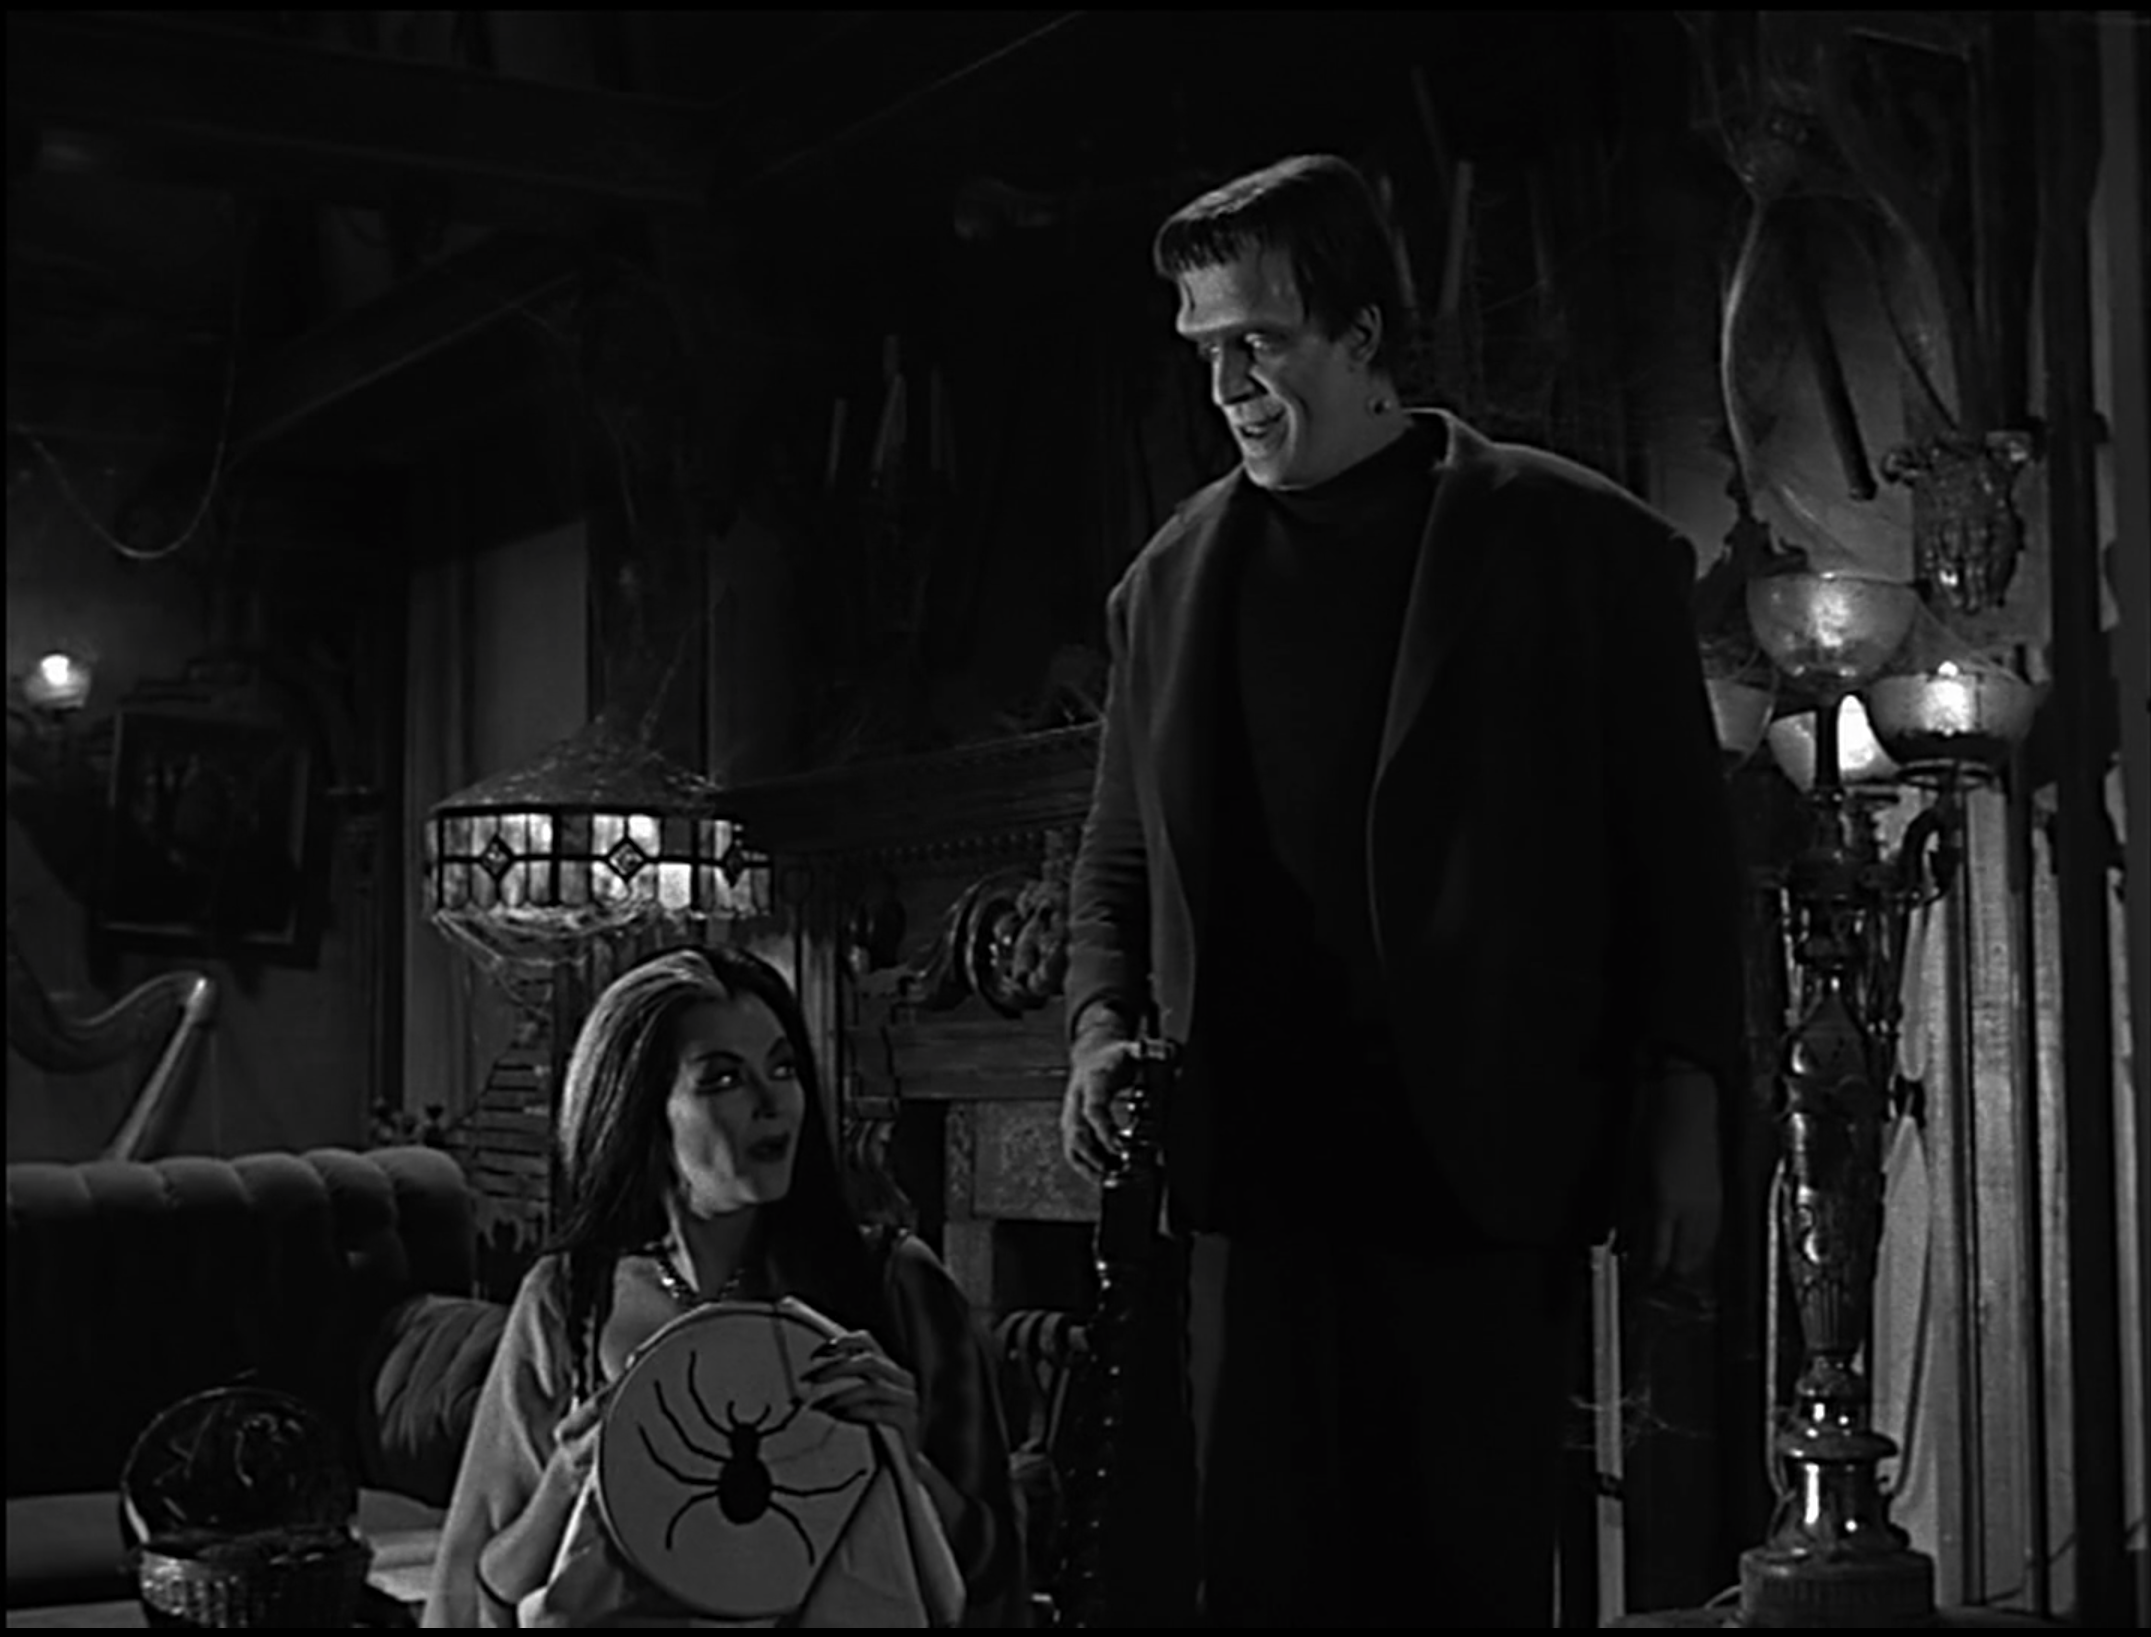 Lily and Herman Munster chat in their living room